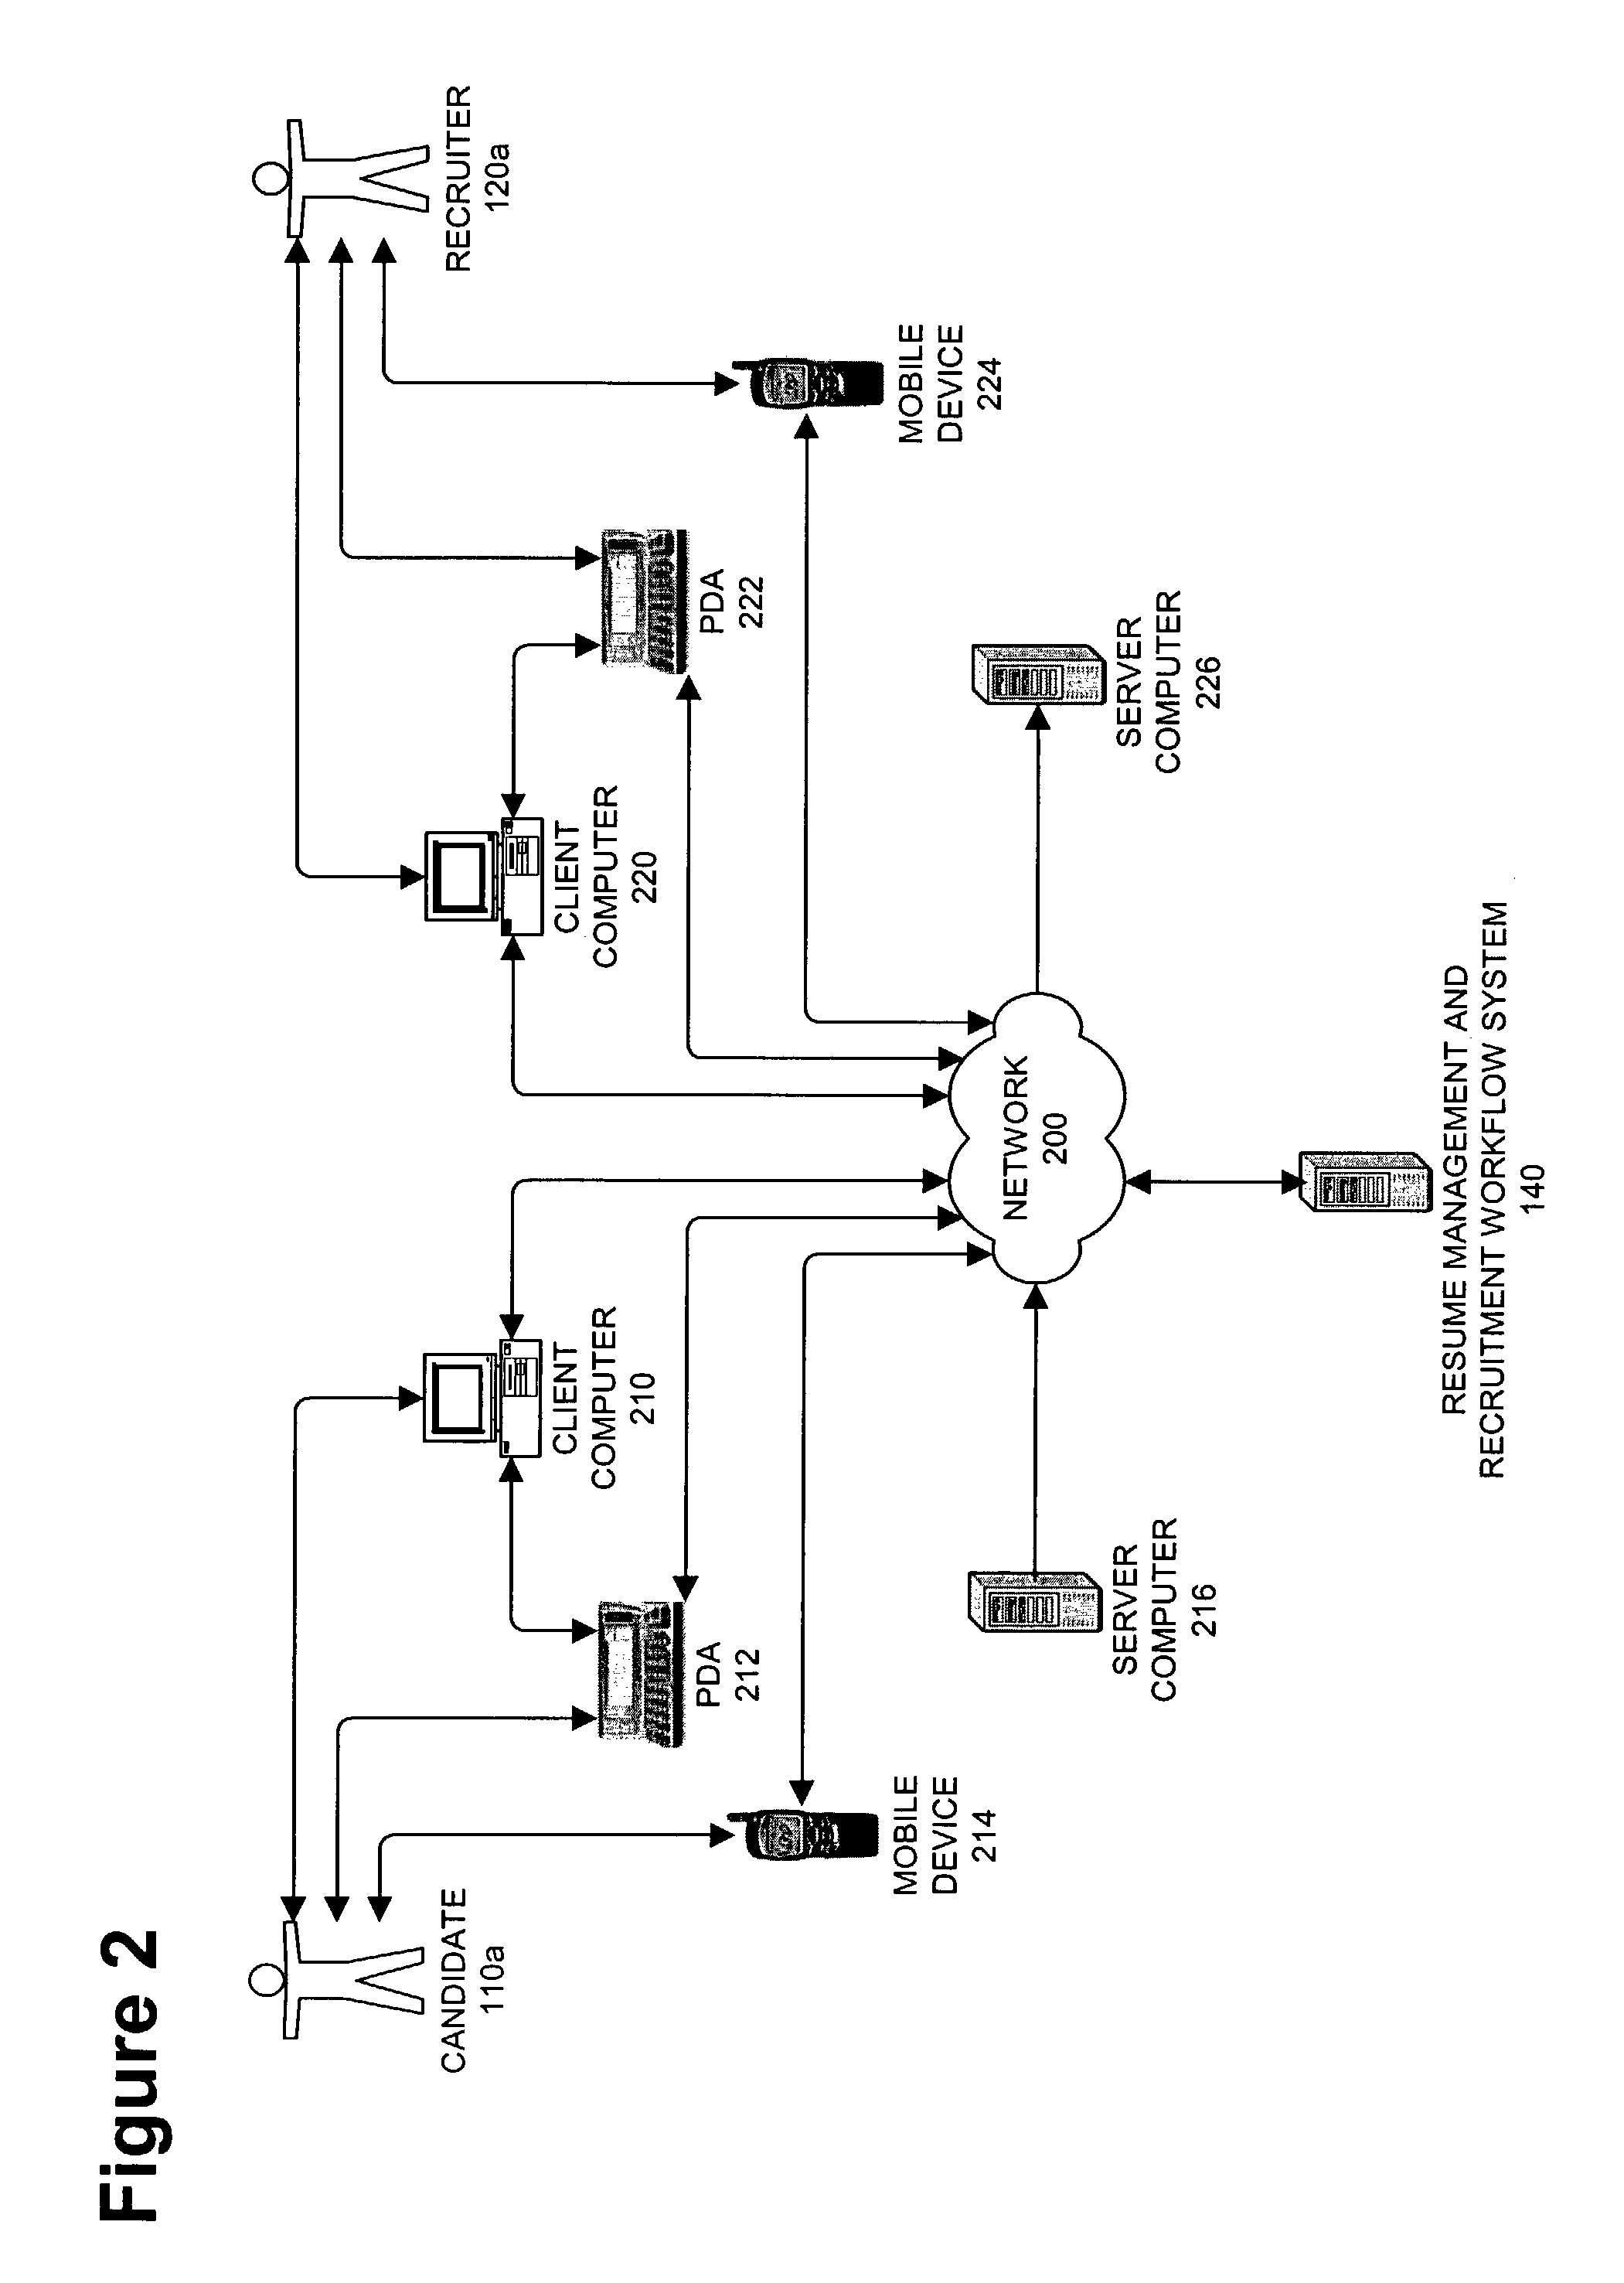 Resume management and recruitment workflow system and method